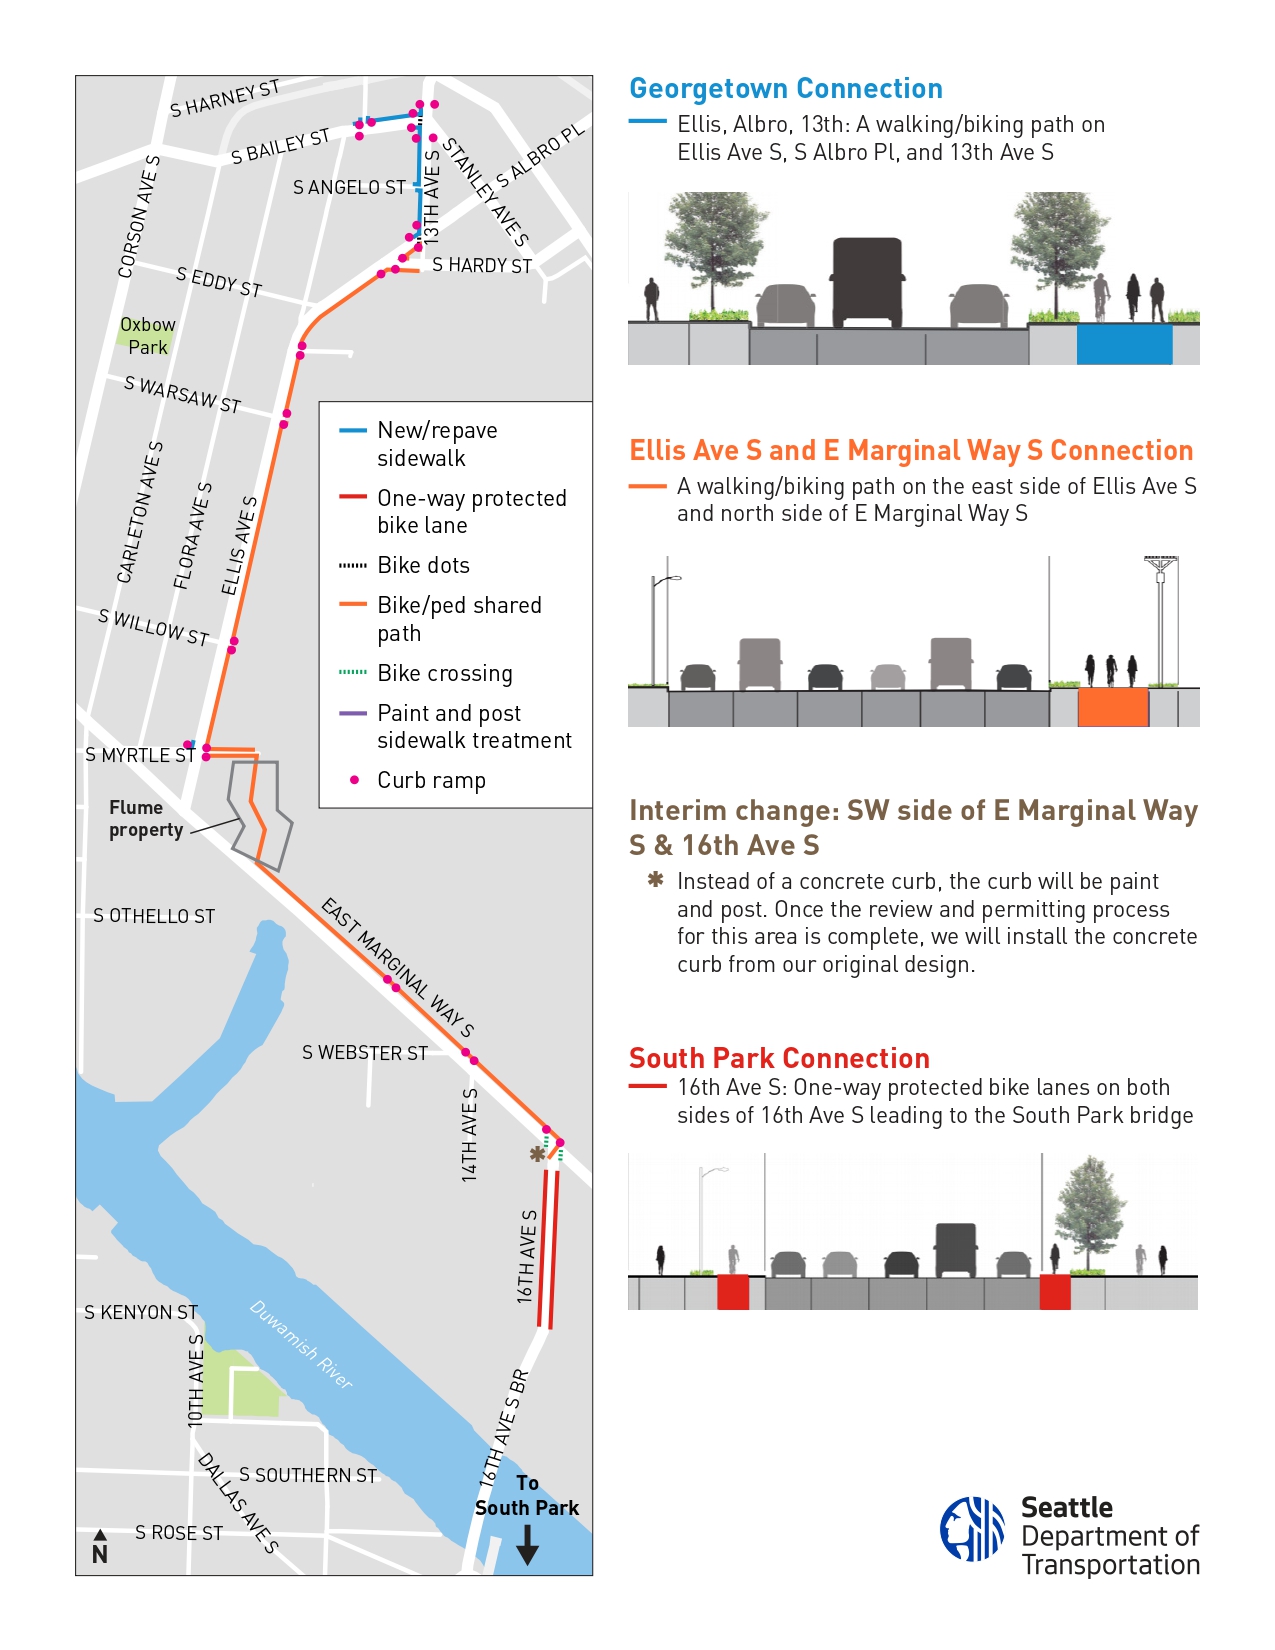 Project map showing pedestrian and bicyclist shared path on Ellis Ave and E Marginal Way S.